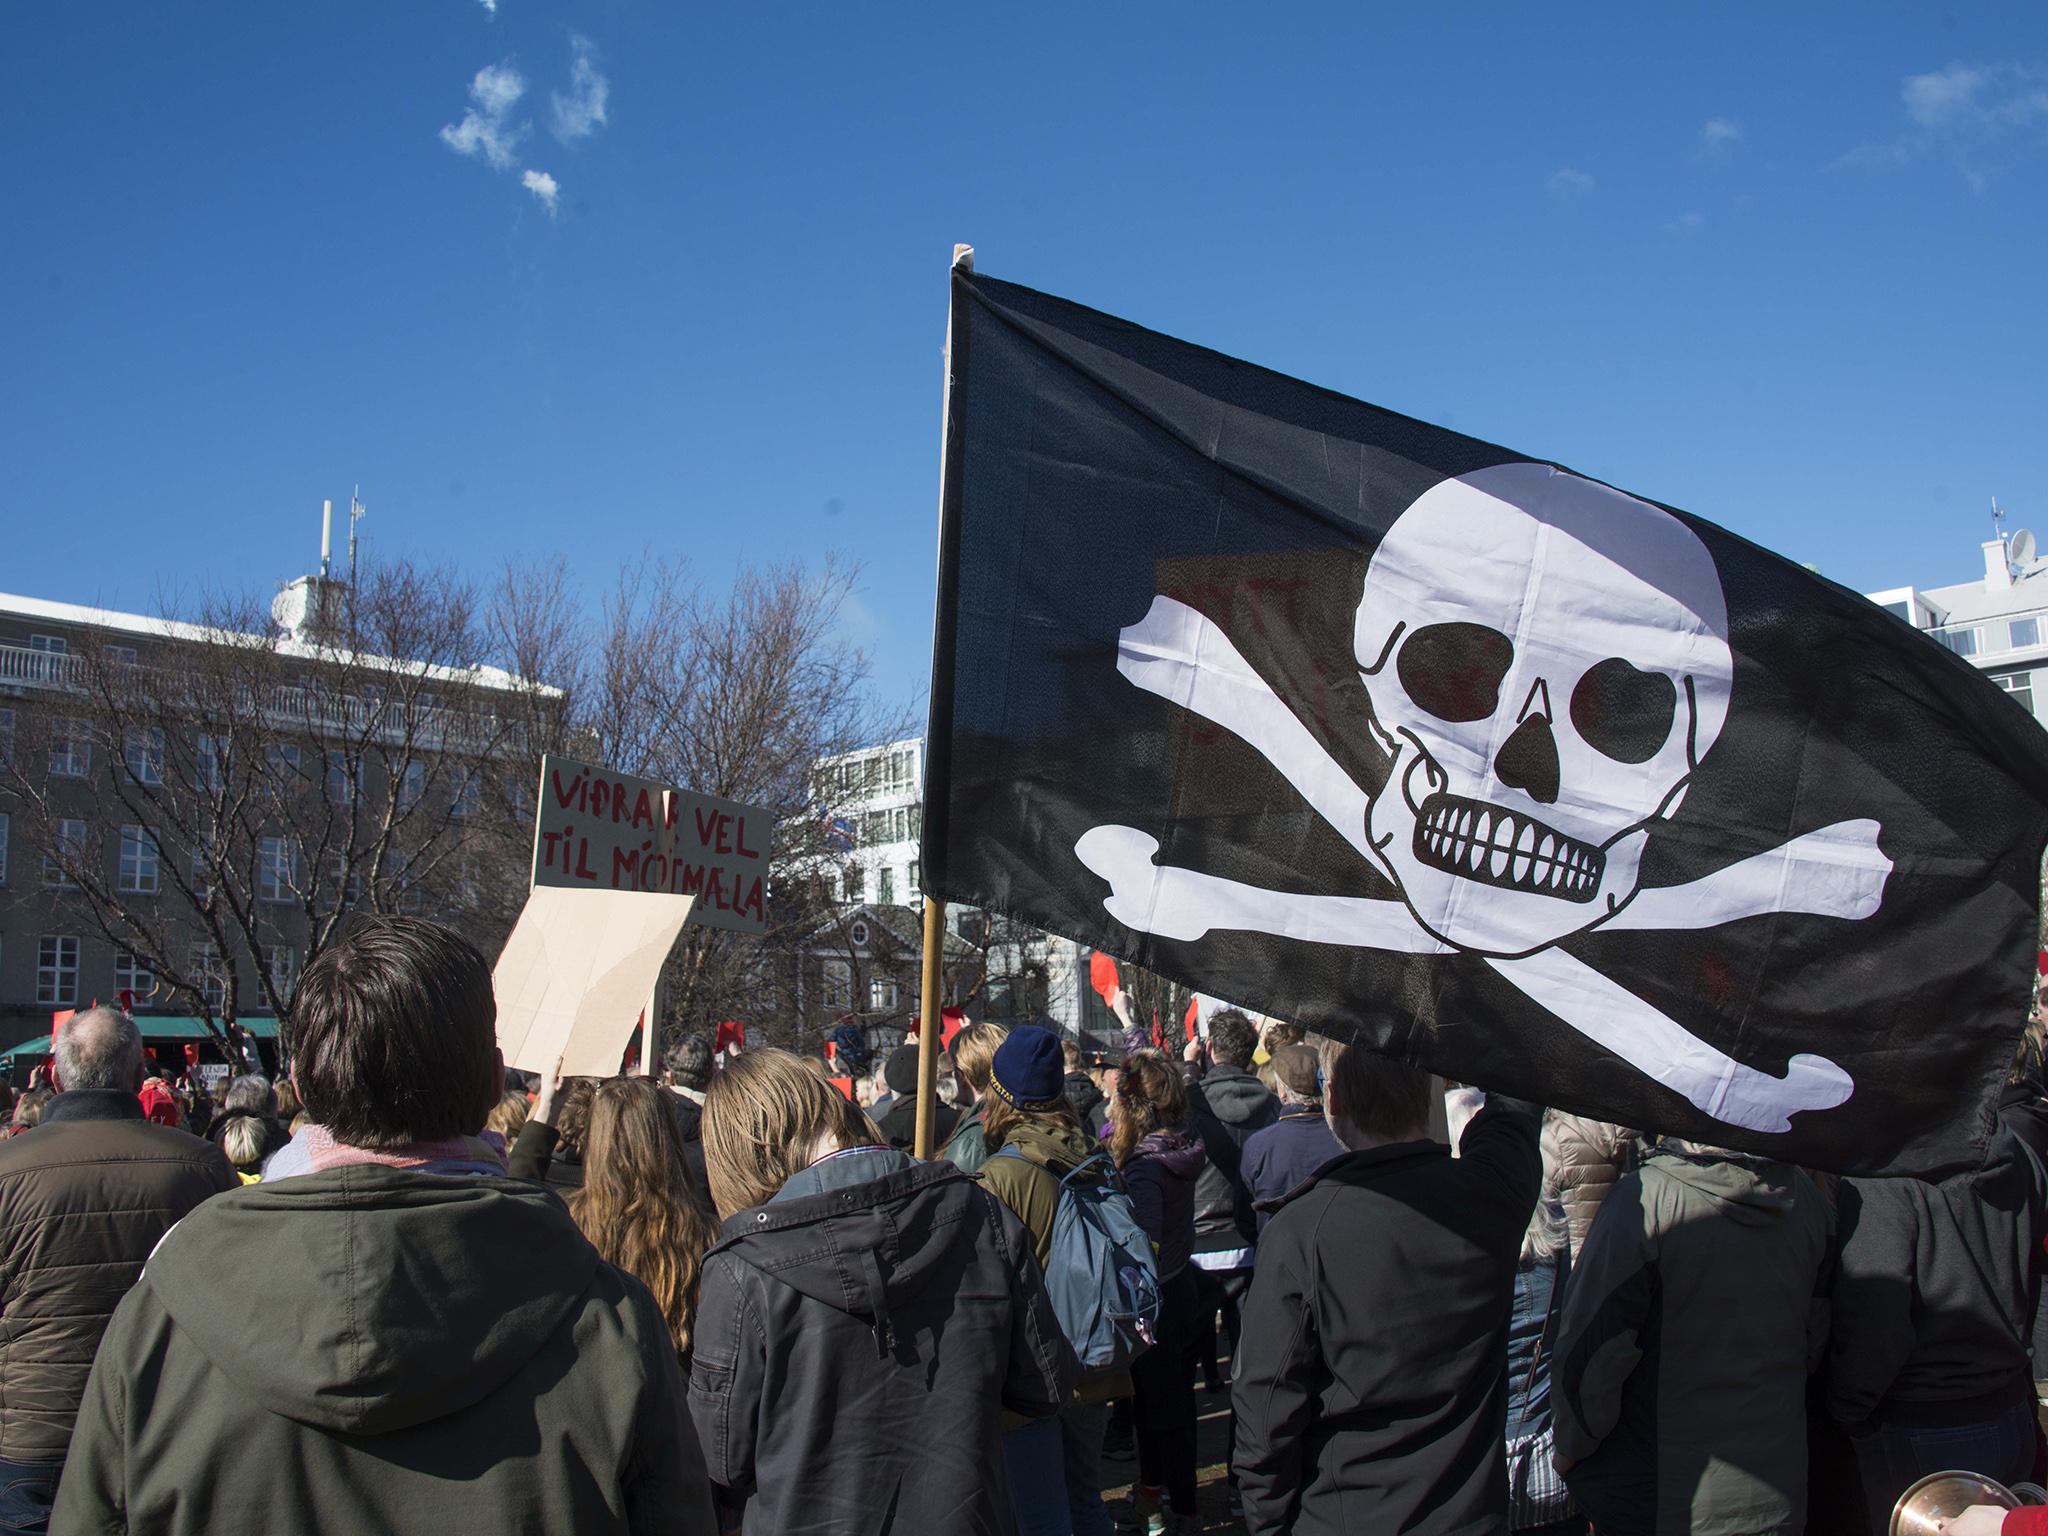 Public anger at corruption in Iceland has led to support for the Pirate Party